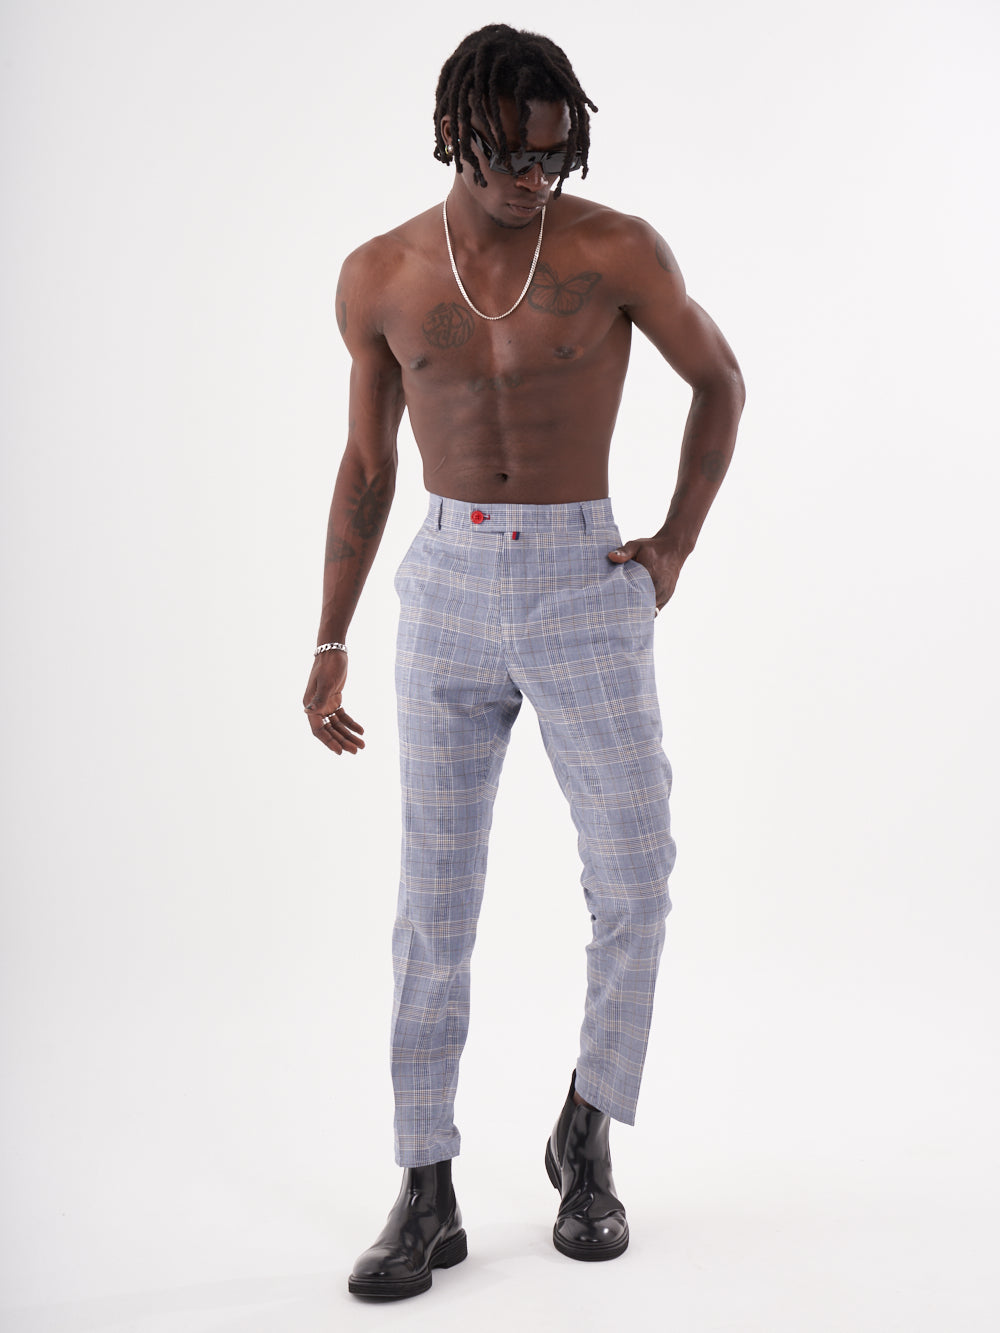 A man with no shirt and no shoes is posing for a photo wearing Moraine pants.